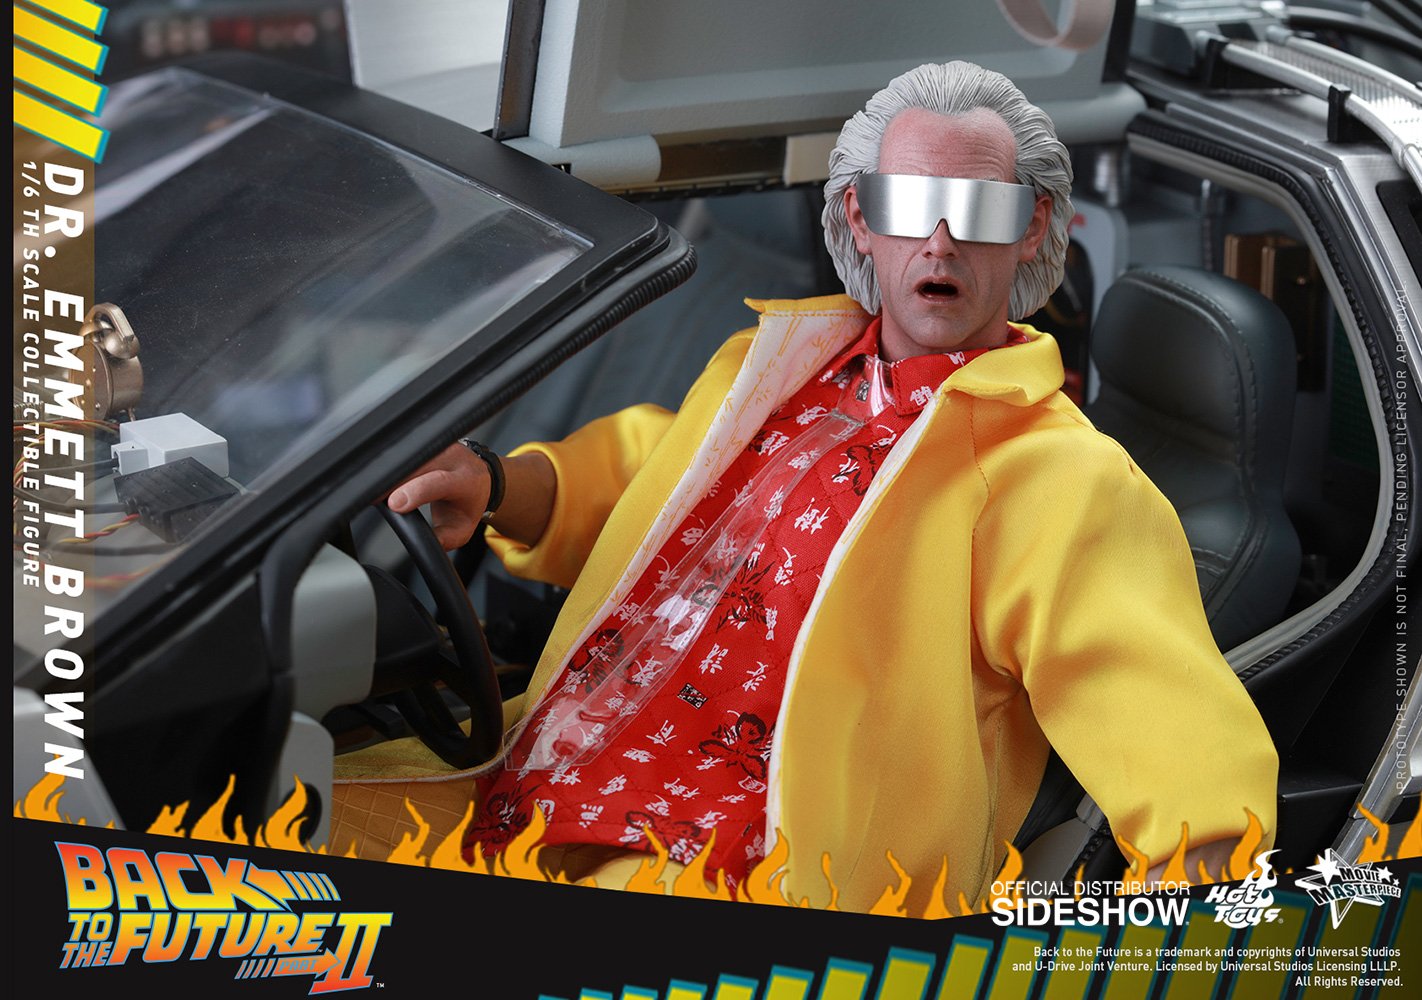 back-to-the-future-2-dr-emmett-brown-sixth-scale-hot-toys-902790-12.jpg